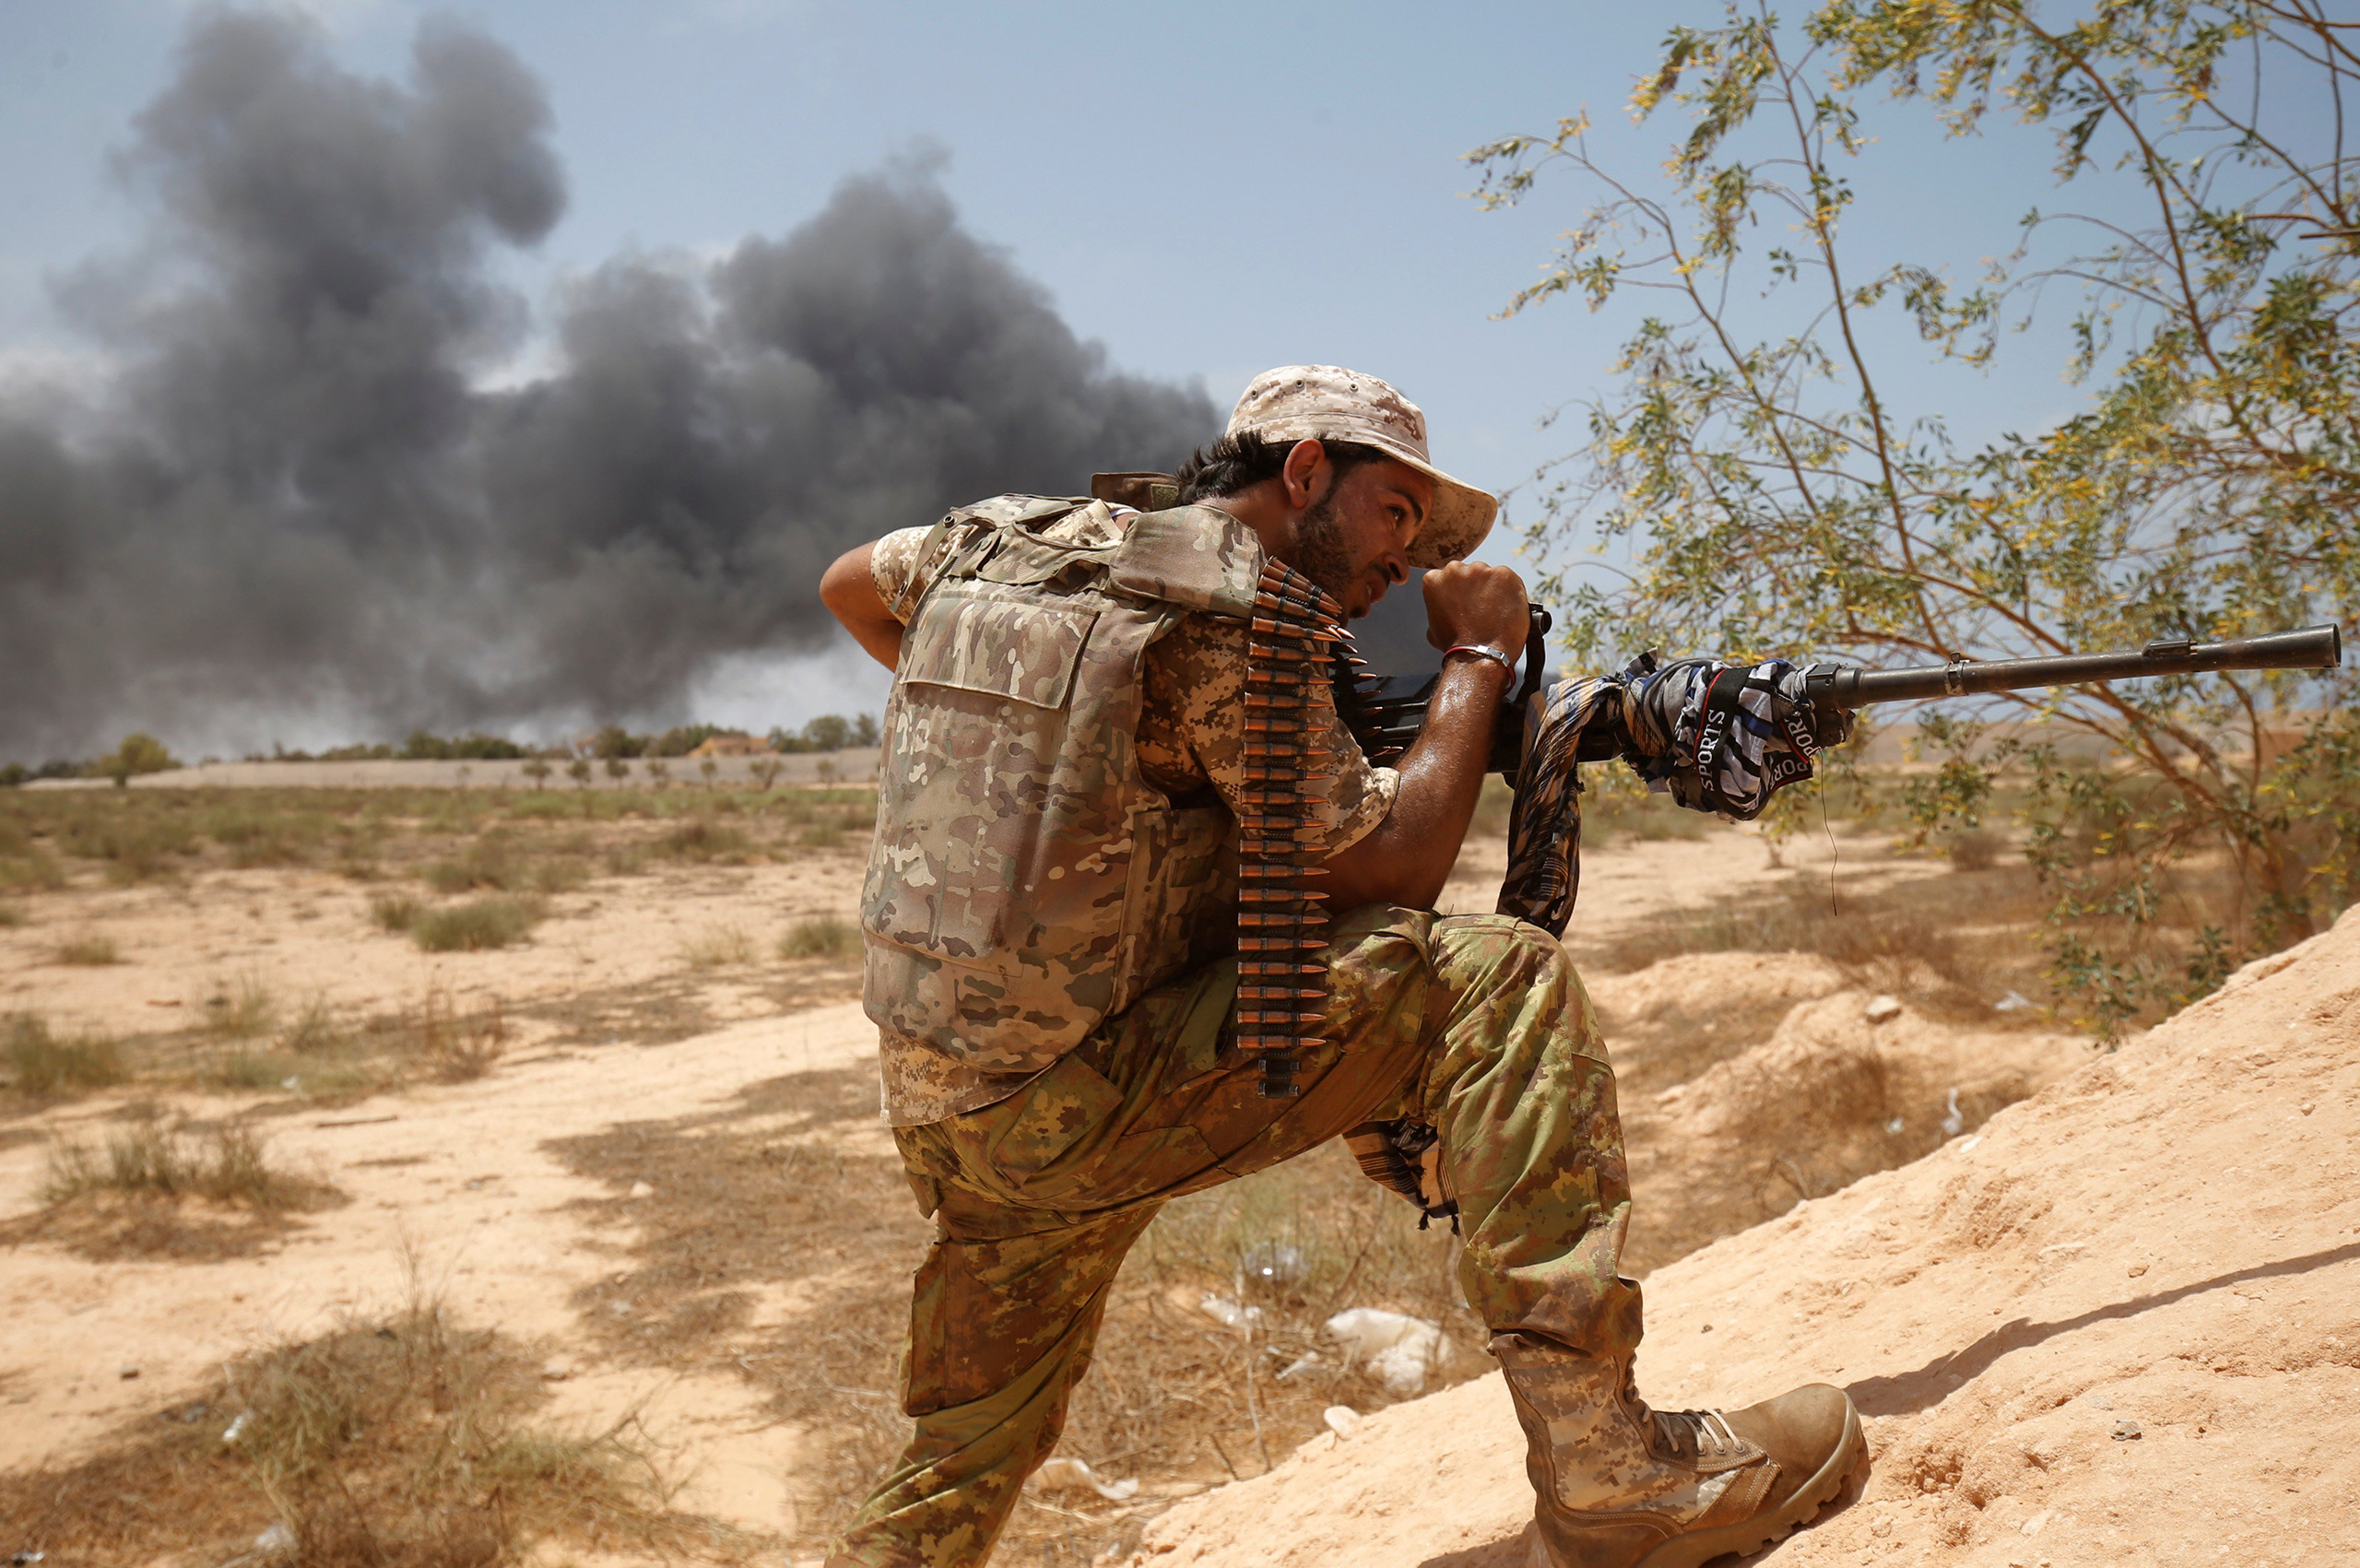 A member of the Libyan forces allied with the U.N.-backed unity government fires his gun at ISIS fighters during a battle in Sirt, Libya, on July 15, 2016.